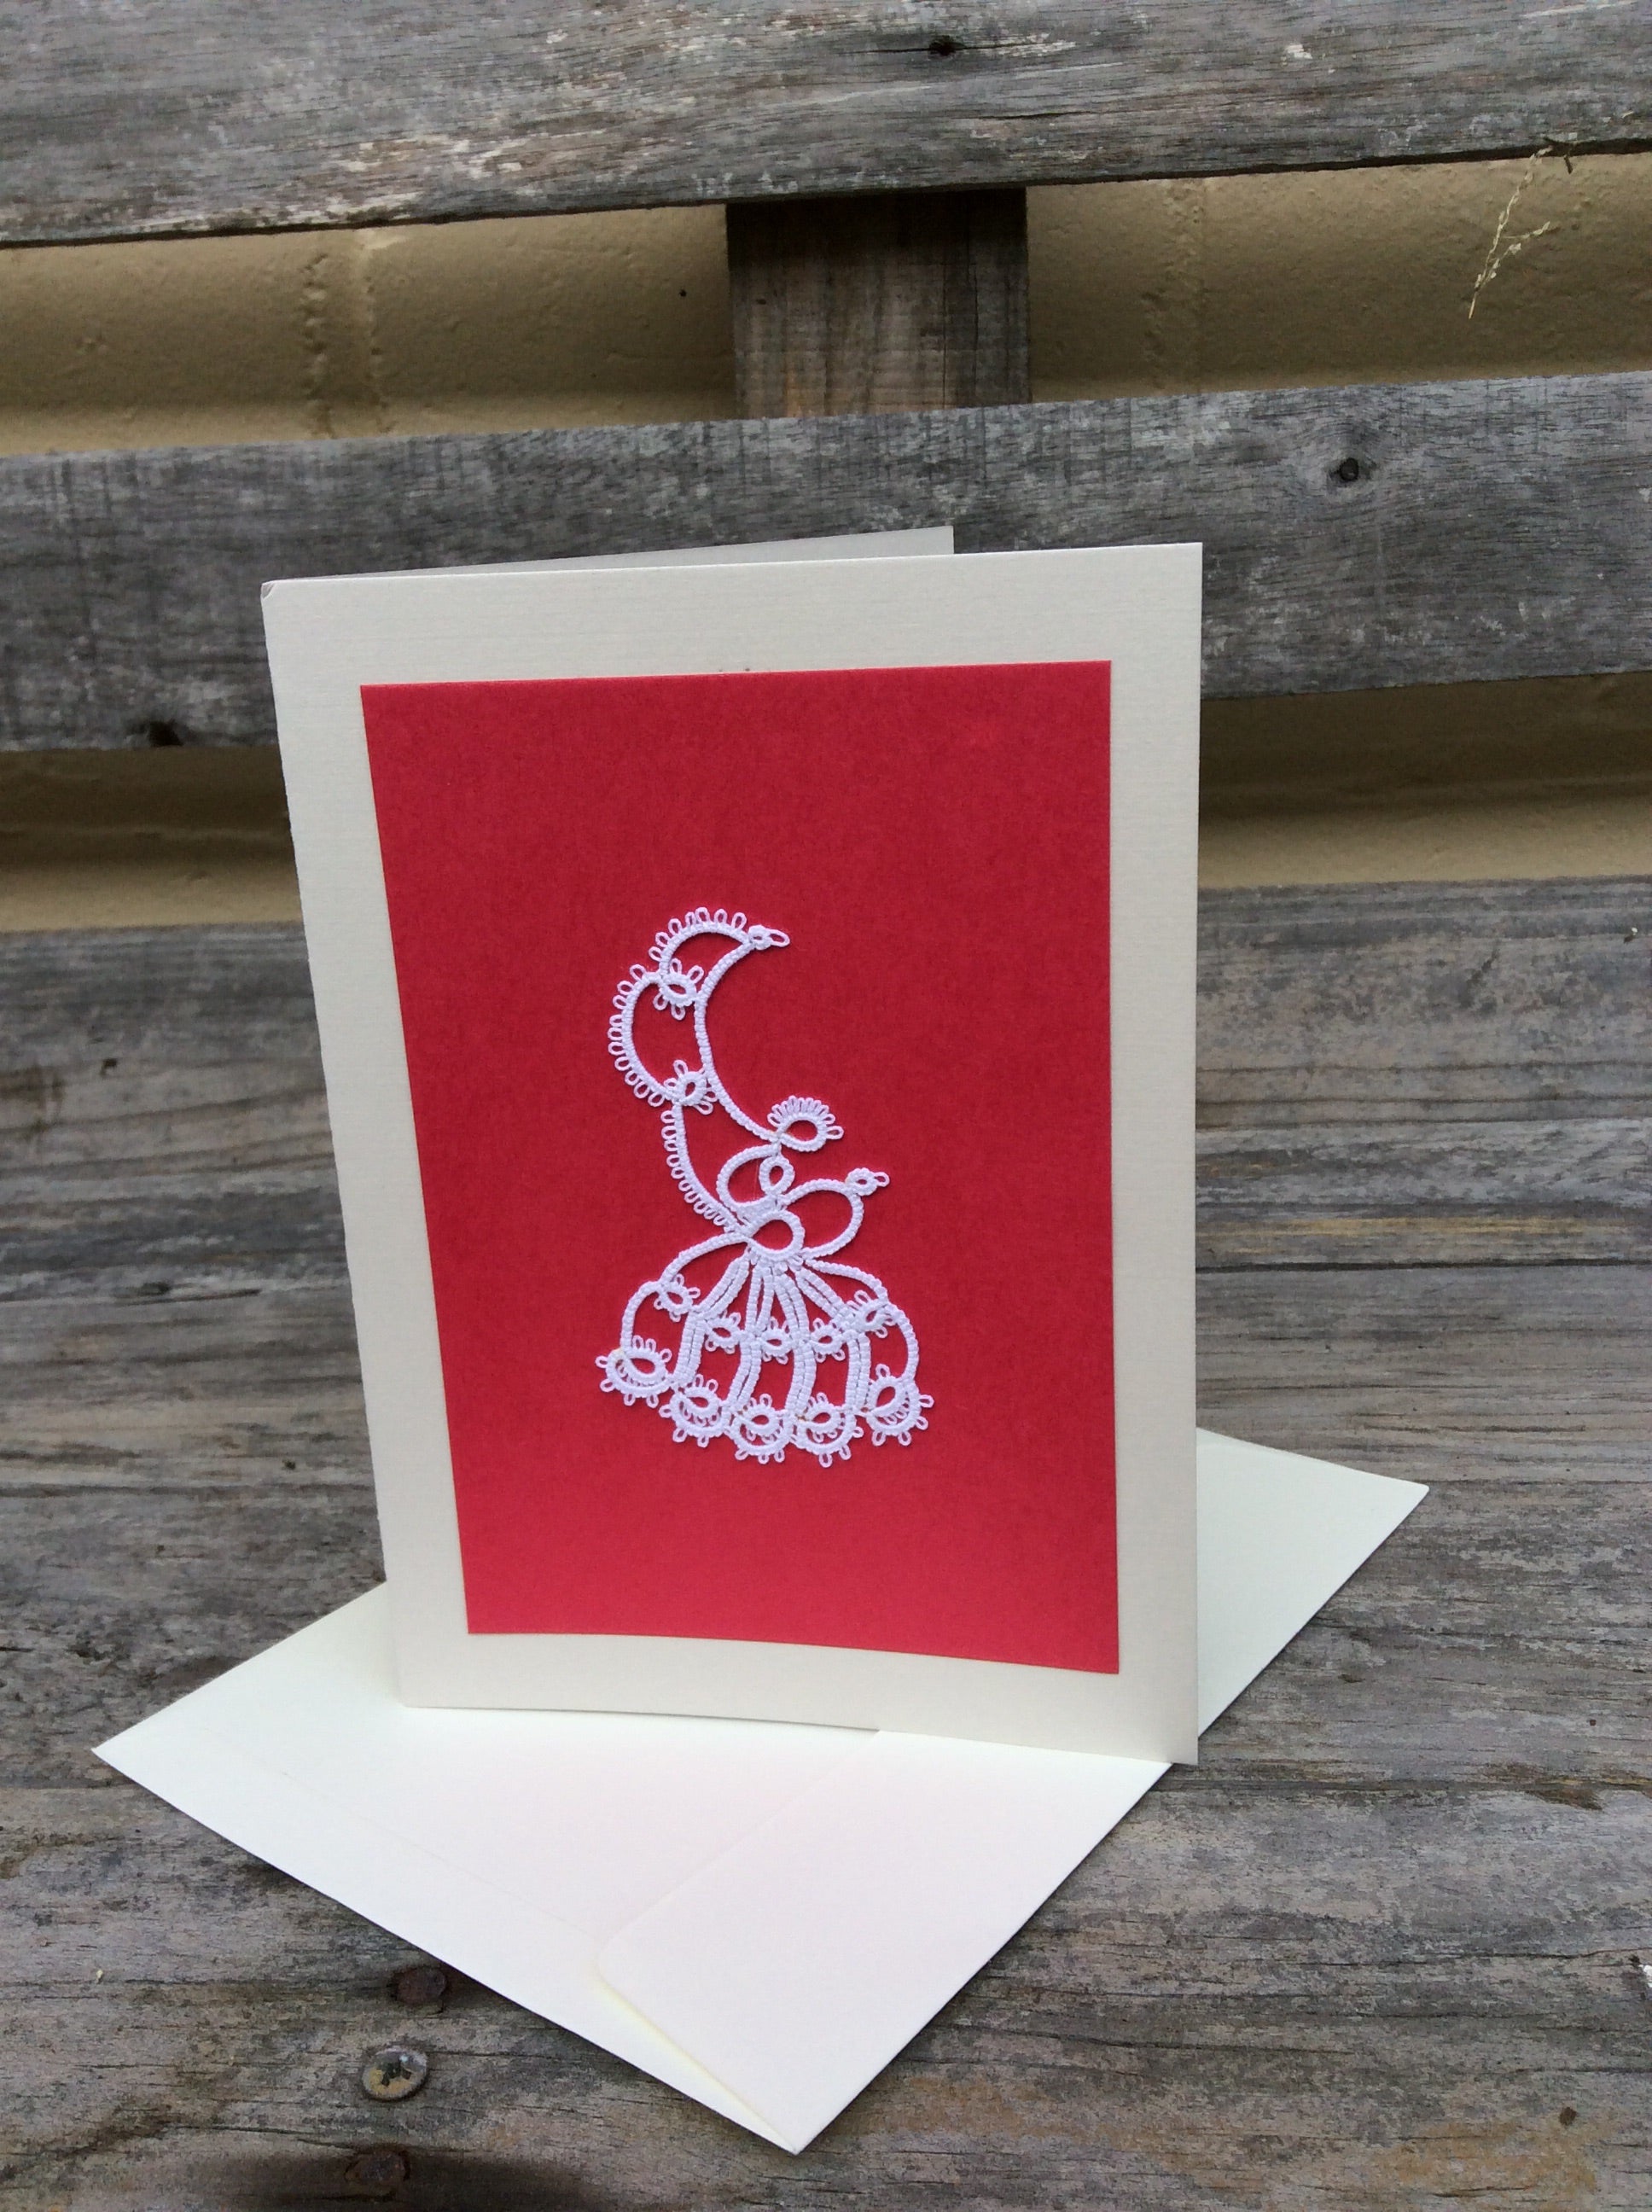 Pink handmade card with a white boarder with a tatted design in the middle.